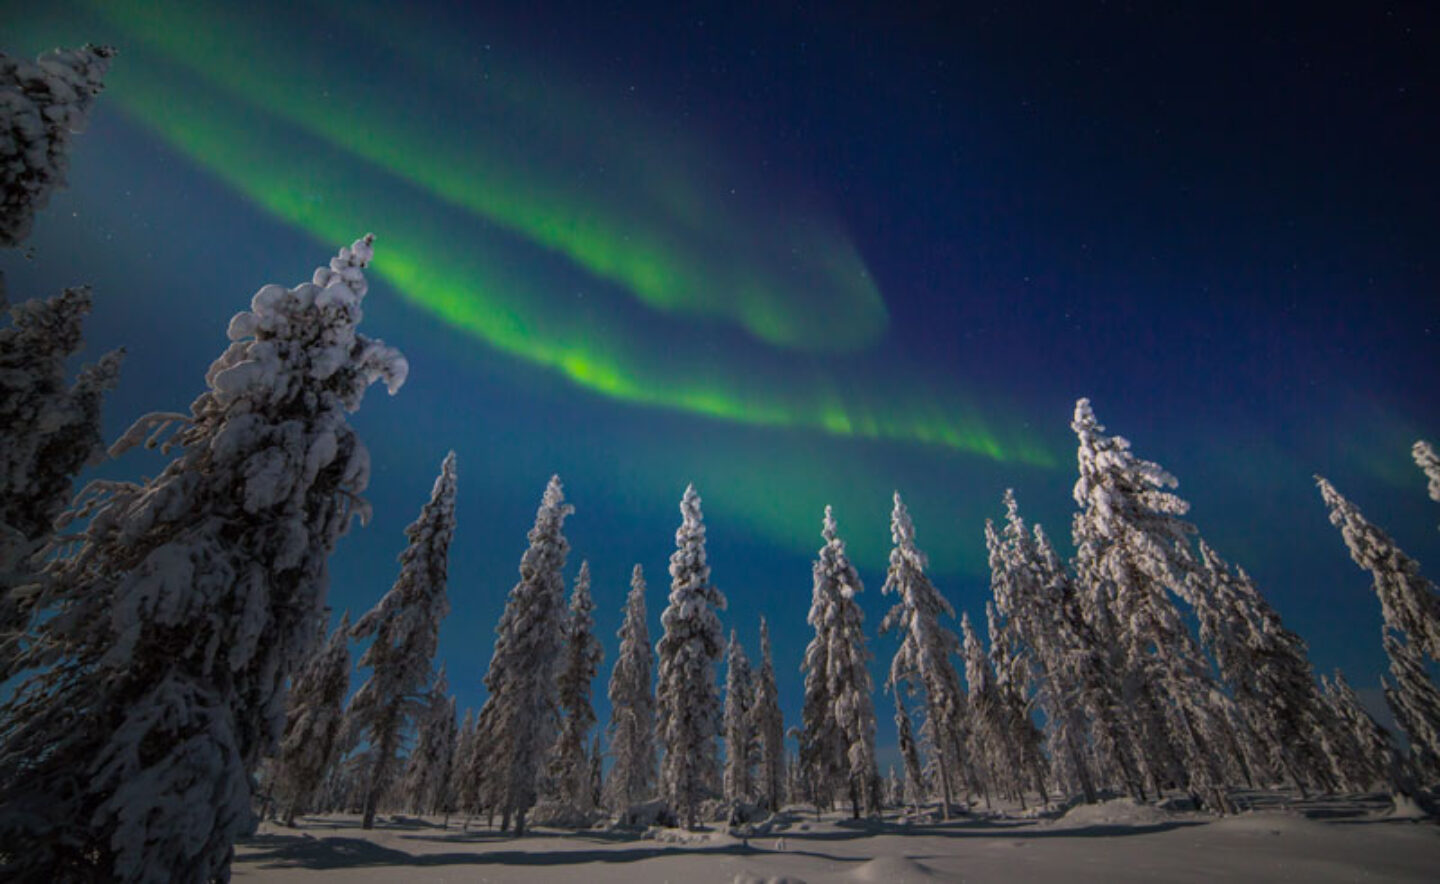 finland lapland muotka northern lights over fir trees